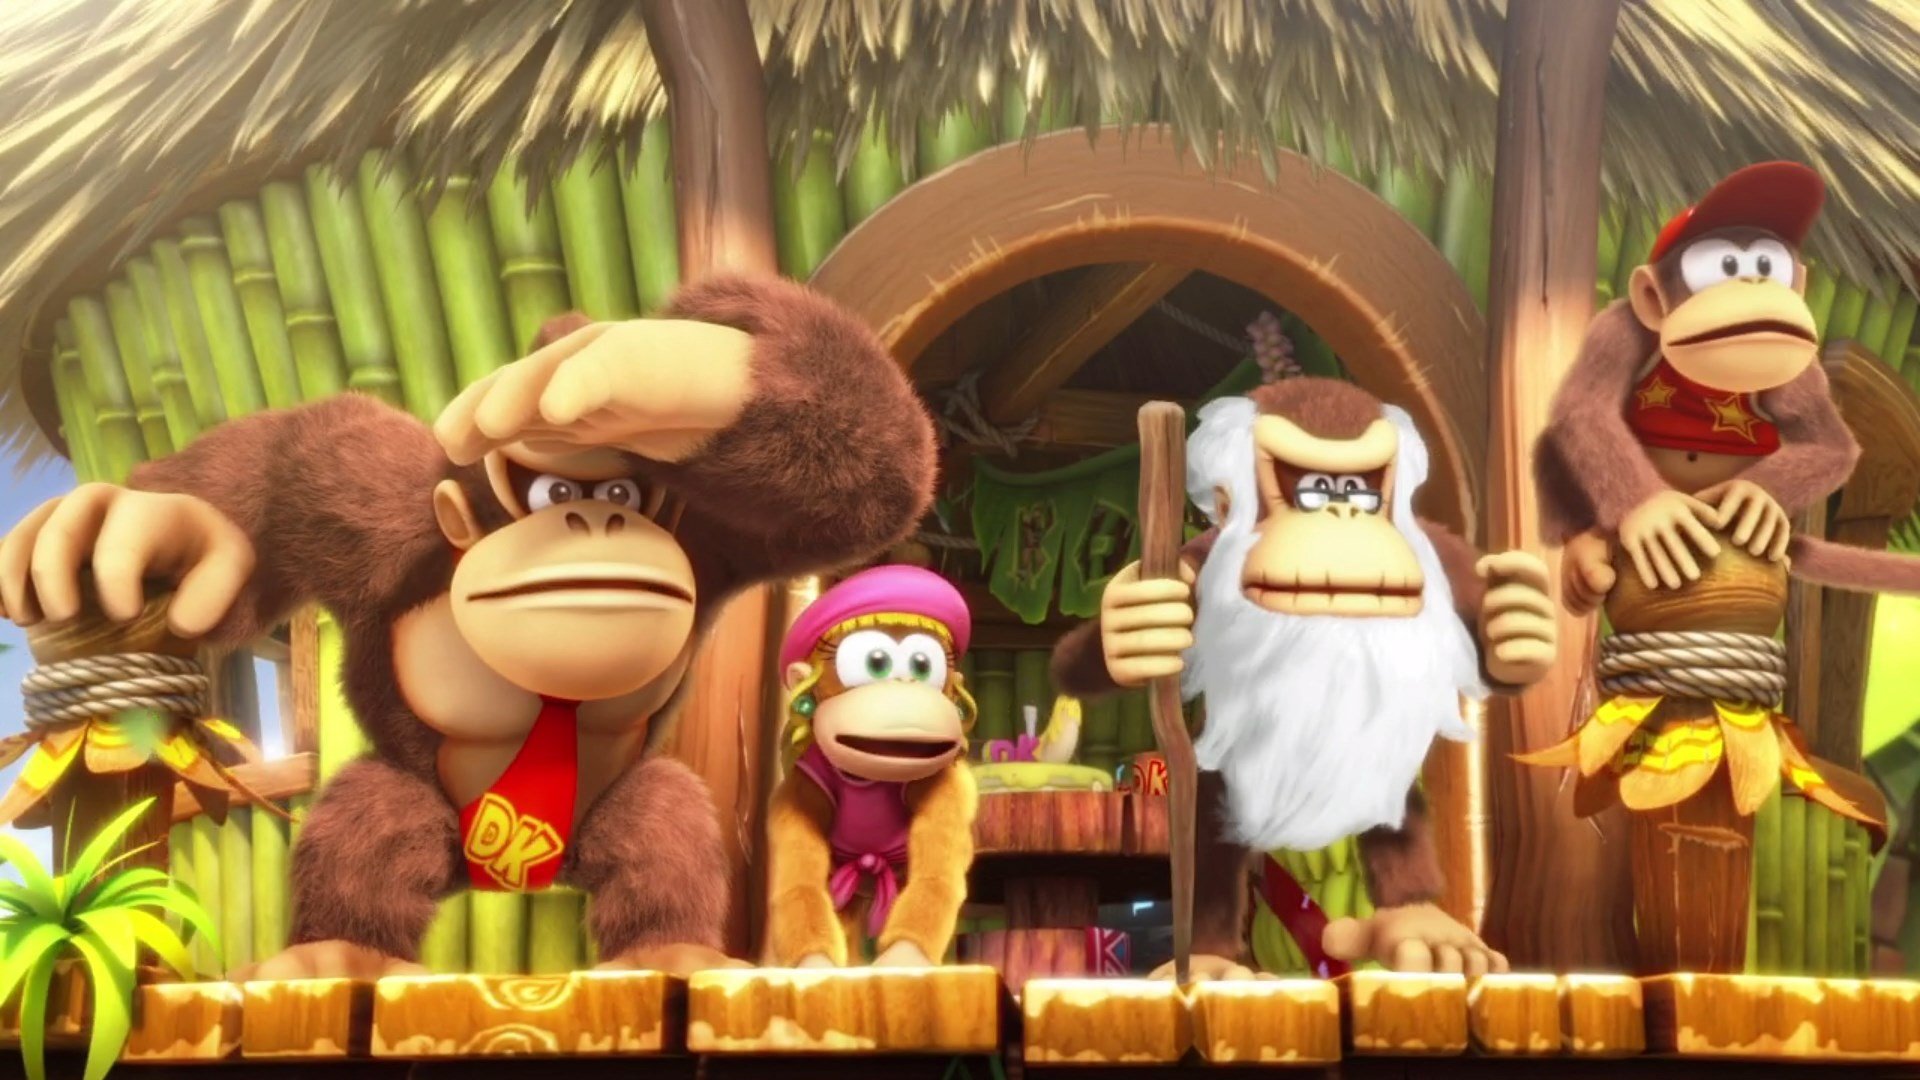 Five Donkey Kong Games That Need to Make a Return on the Nintendo